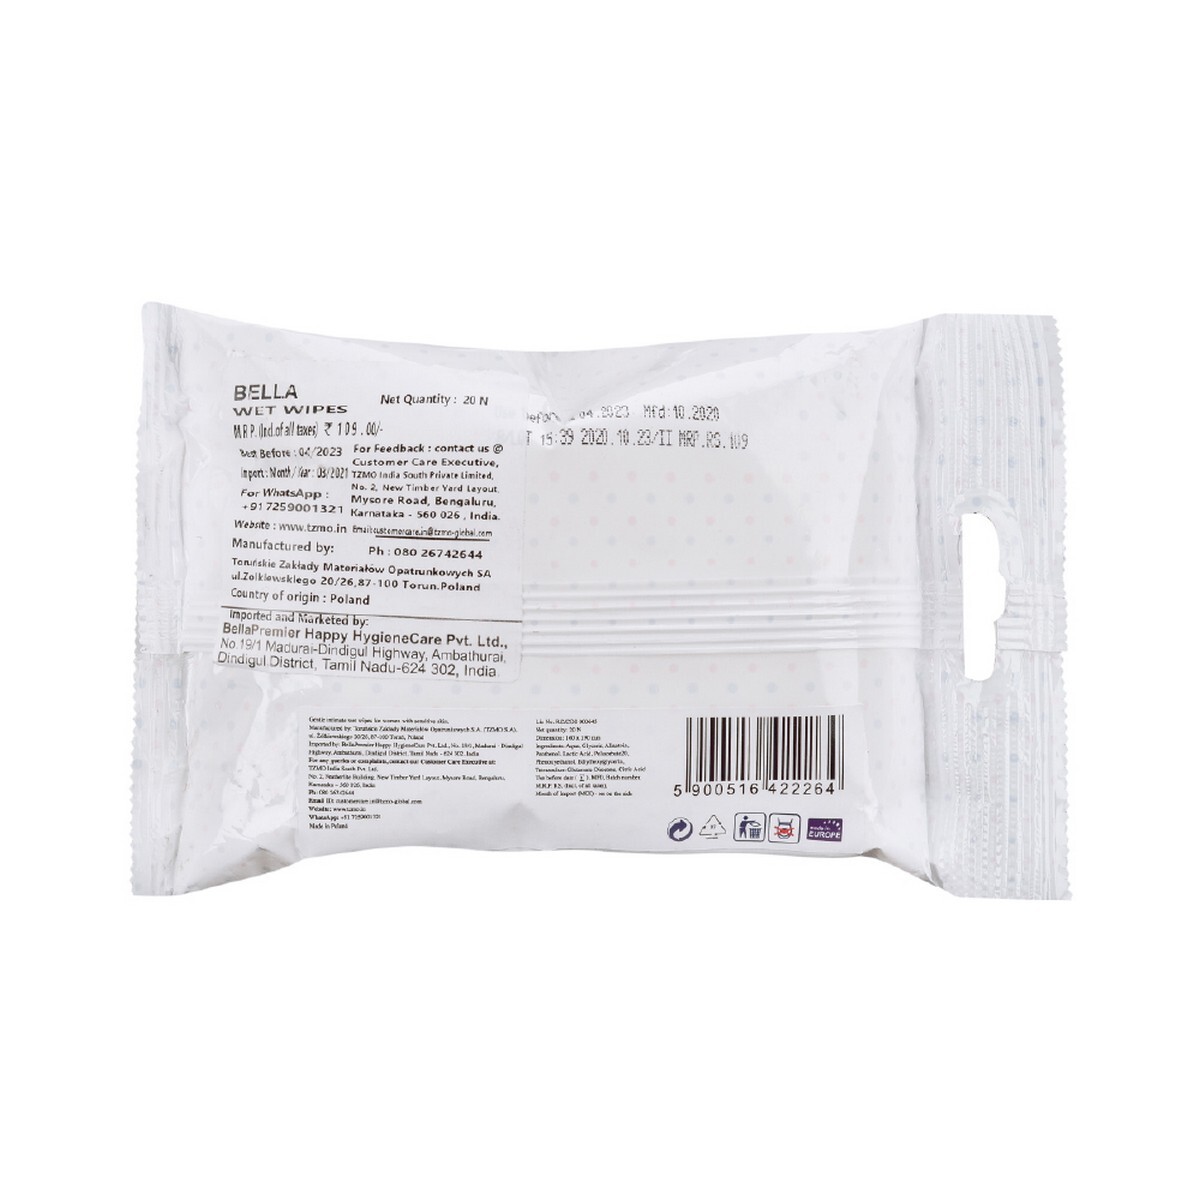 Bella Intimate Wet Wipes A20